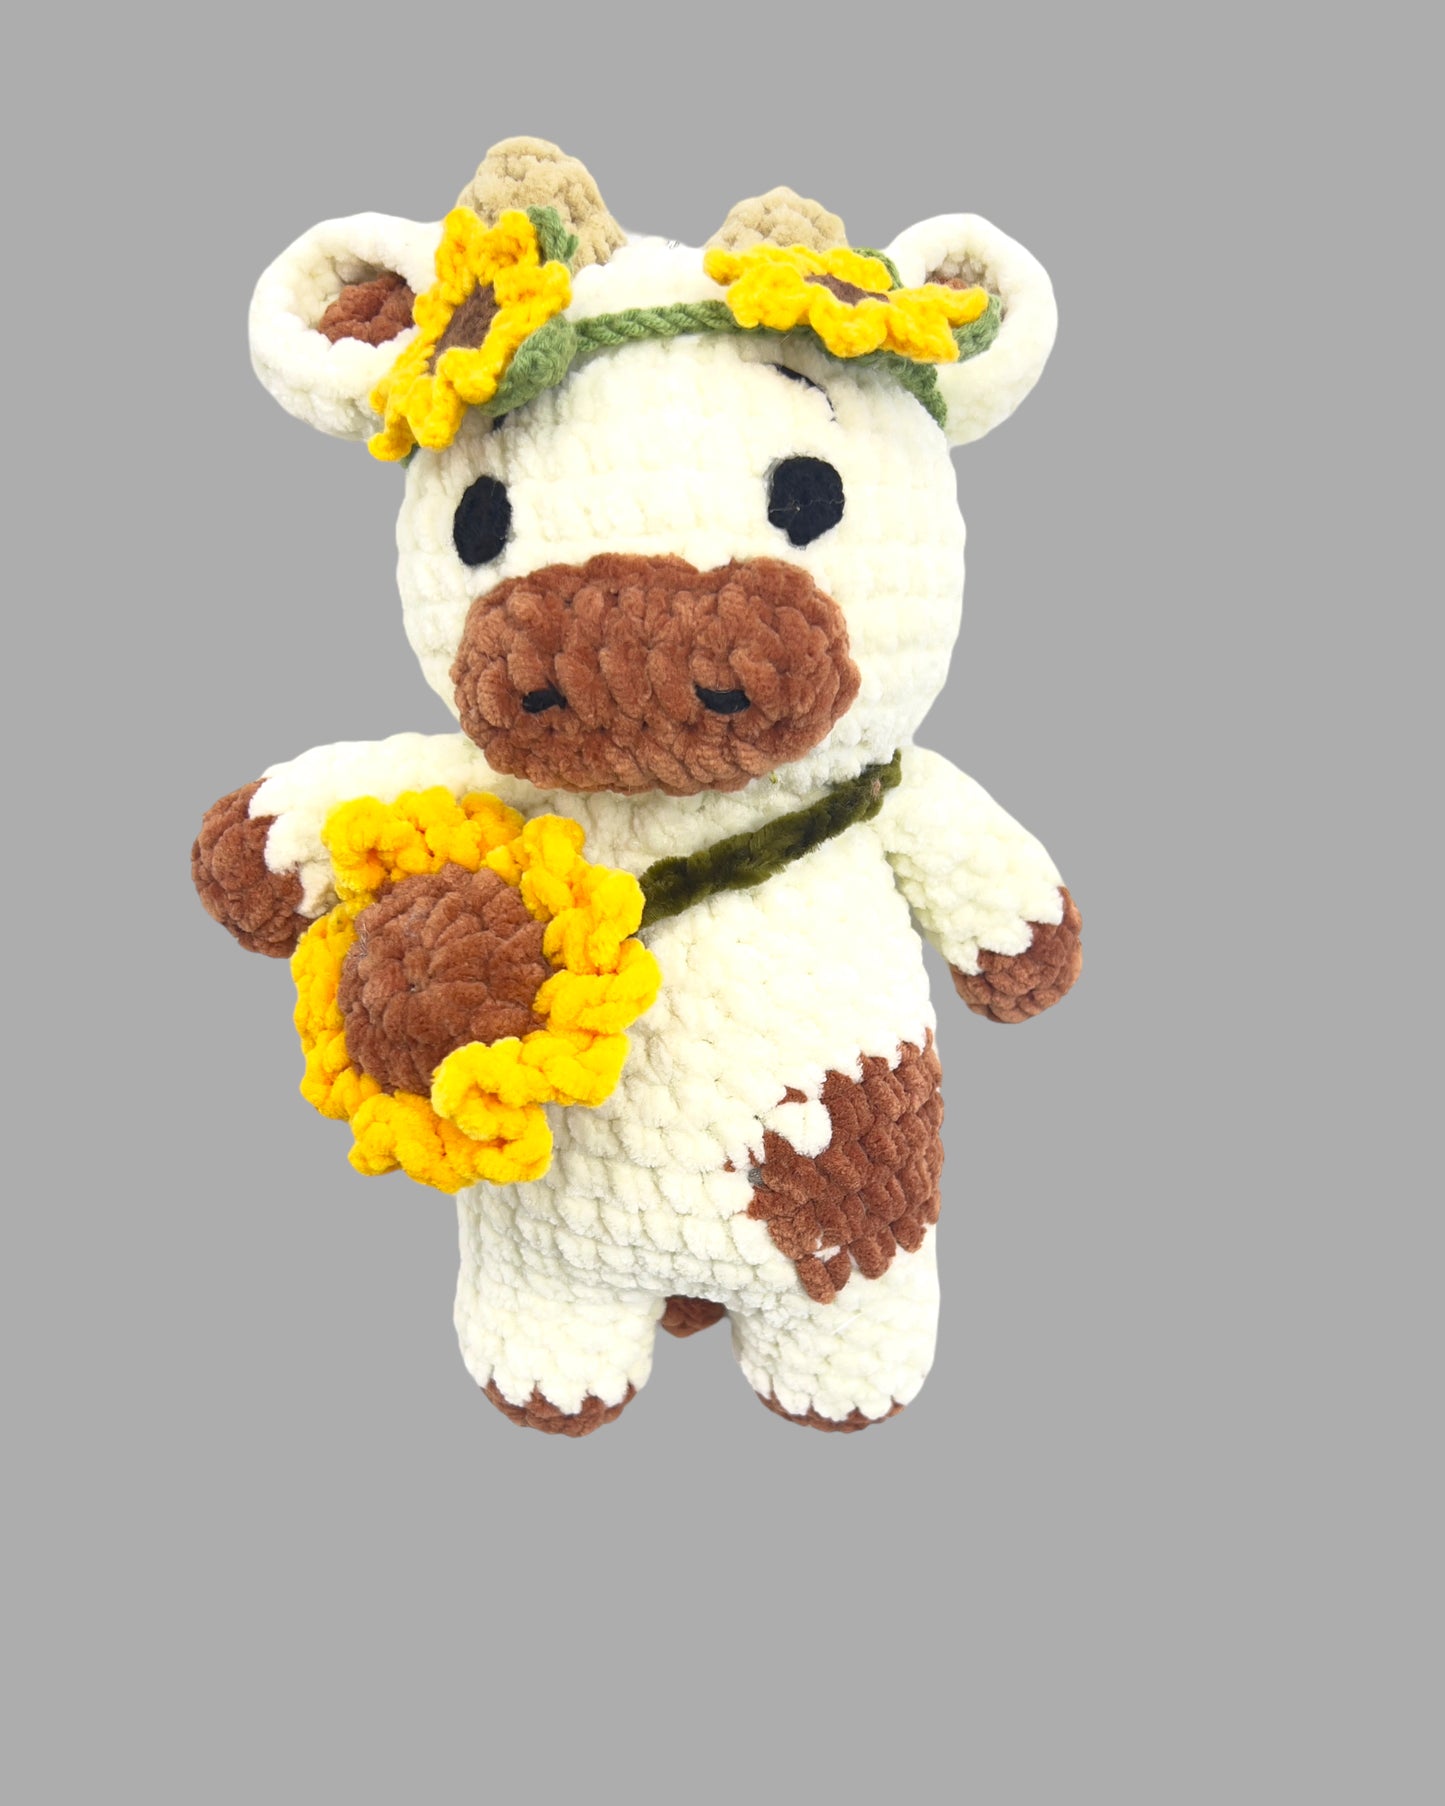 CowHandmade Crochet stuffed Doll for Montessori Play, Nursery Decor, and Baby Shower Gifts for Granddaughter, niece, nephew & grandson